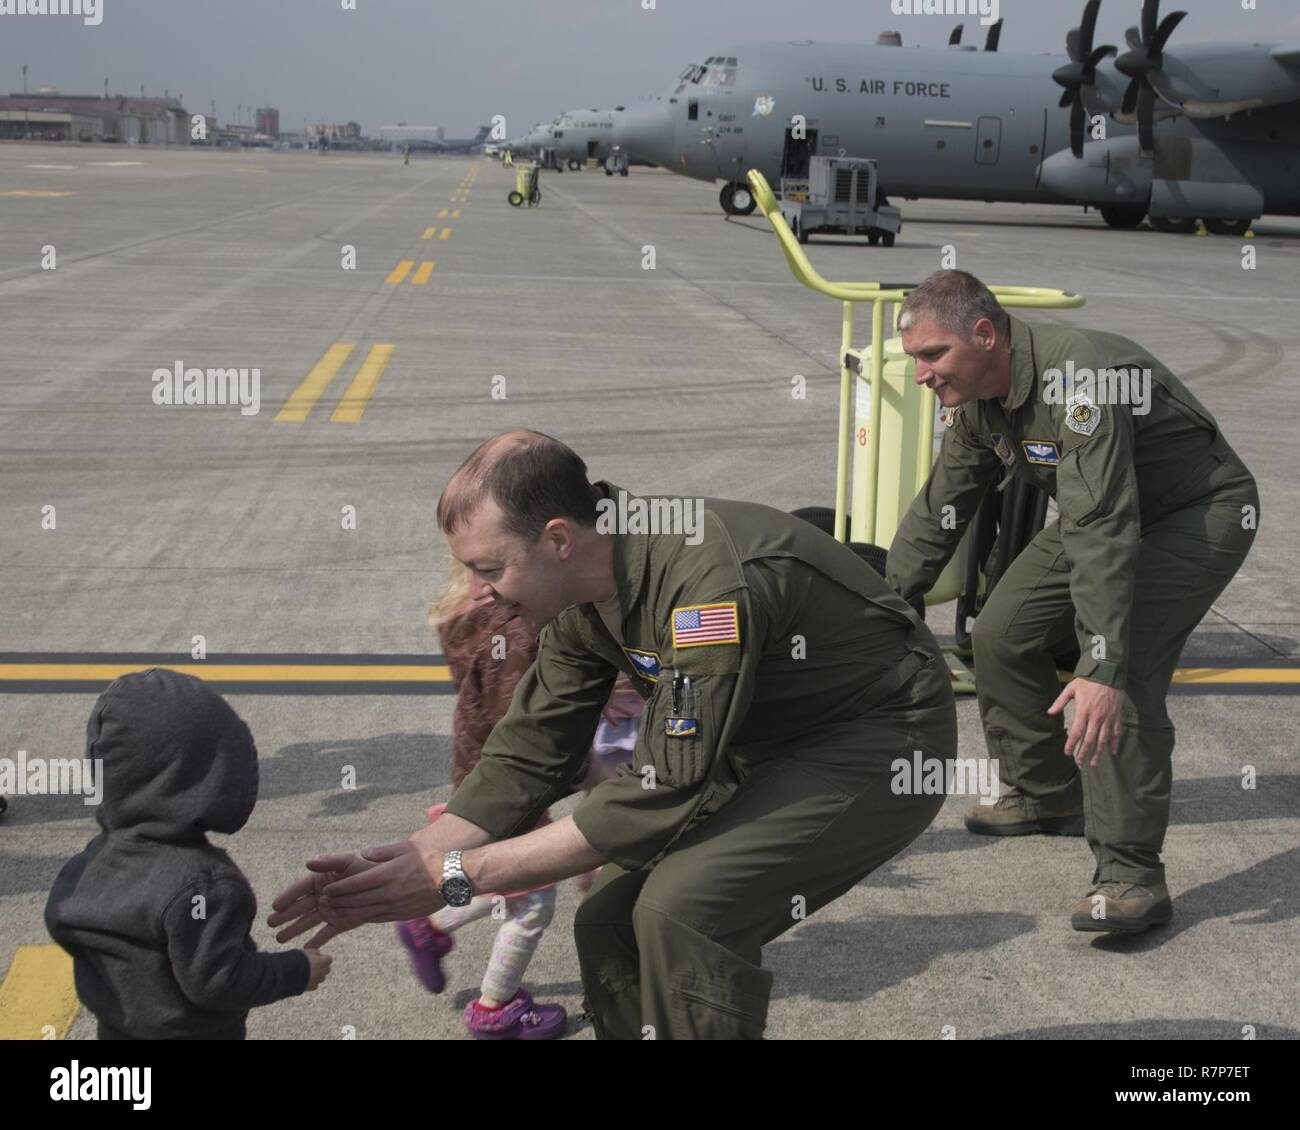 (Left to right) Tech. Sgt. Michael McArty, 374th Operations Group C-130 standardization and evaluation loadmaster, and Lt. Col. Robert Cureton, 374th Airlift Wing C-130J pilot, greet their children after landing at Yokota Air Base, Japan, March 29, 2017. This is the second C-130J delivered from Lockheed Martin, less than a month after the first was delivered March 6th. Stock Photo